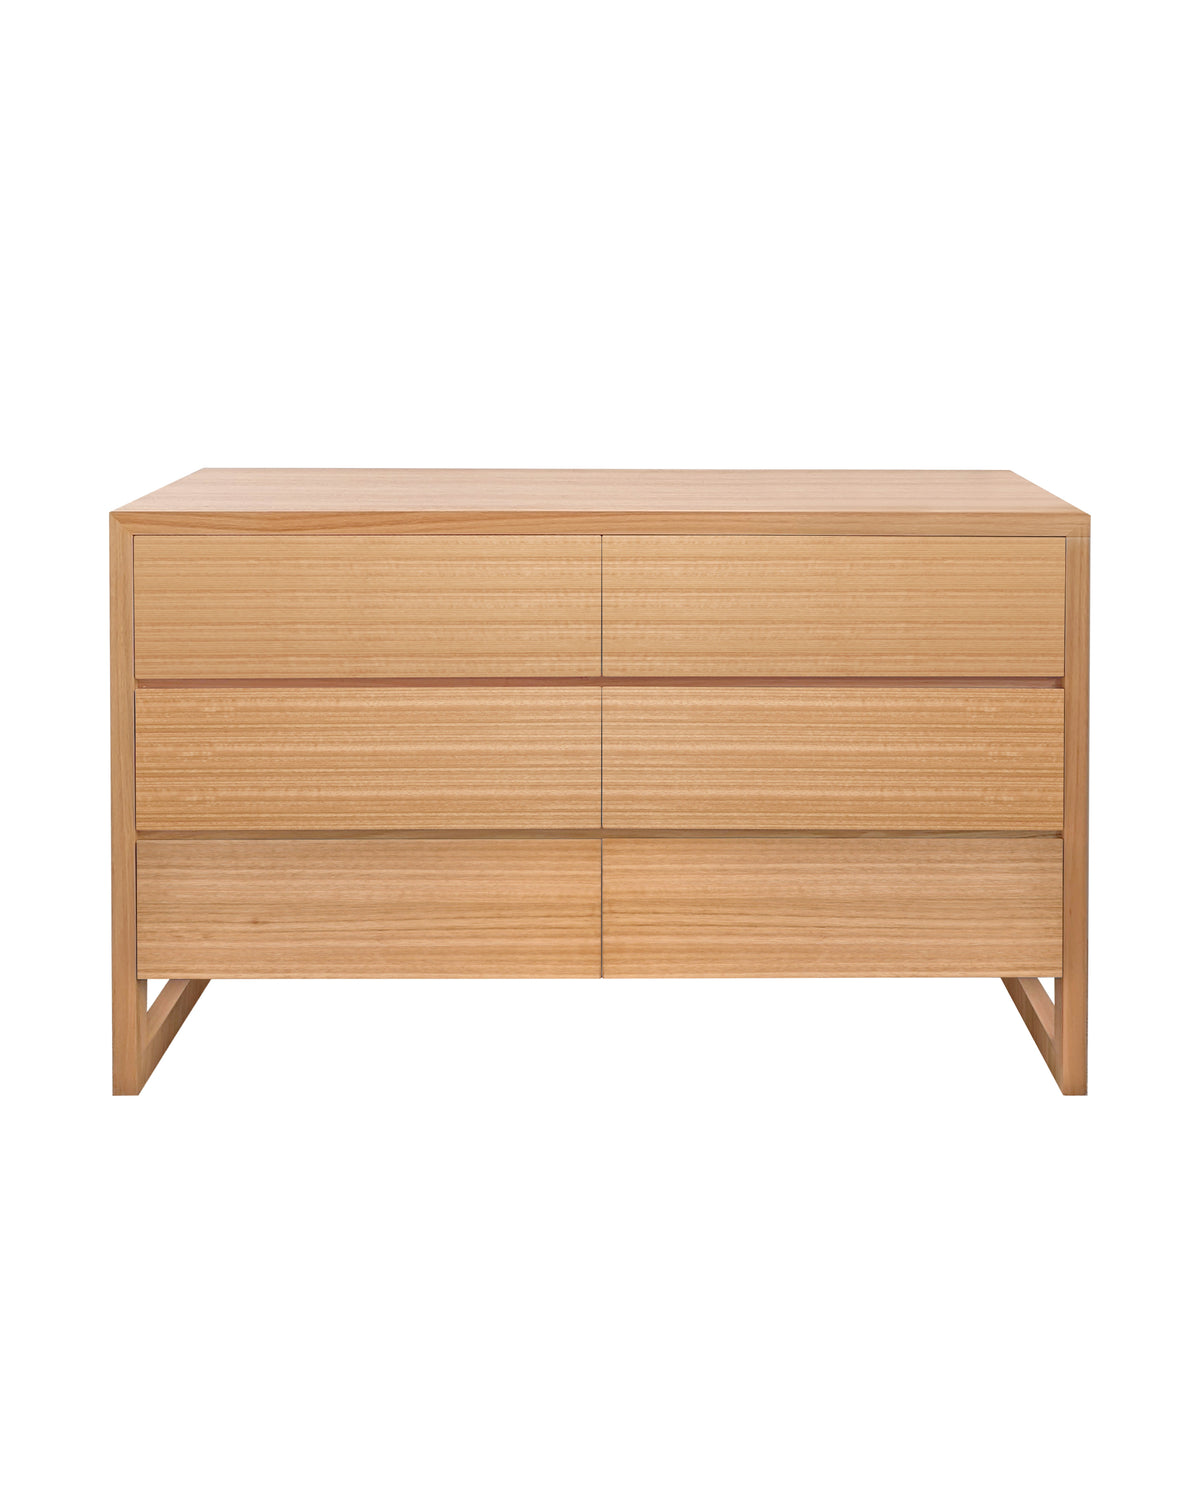 Oak Box Lowboy features a timber frame which encases itself around six timber drawers. Concealing intricate mitred joinery with legs that flow into a continuous wrap, to create classic simplicity.